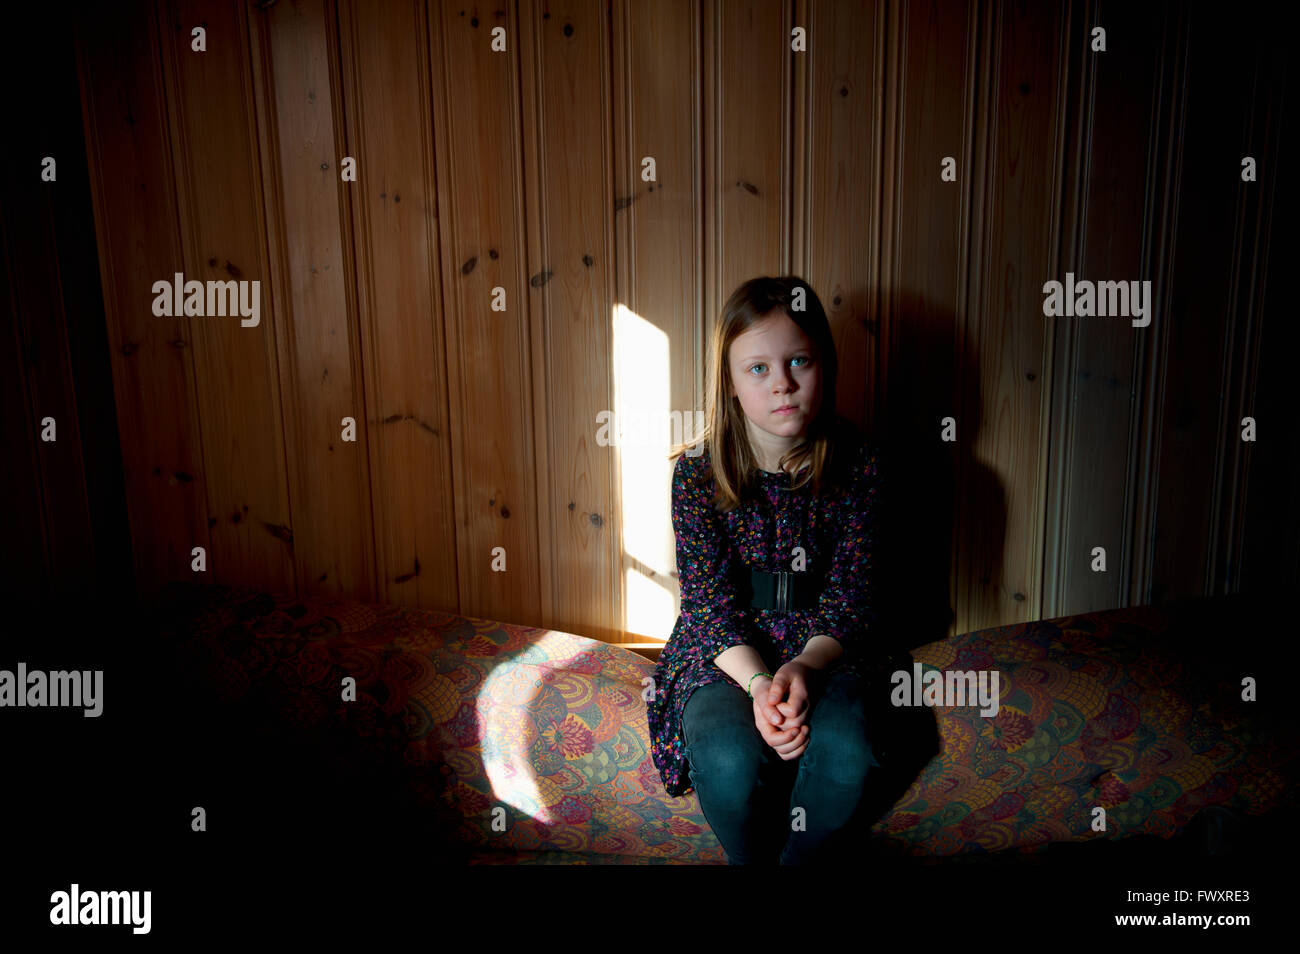 Girl (12-13) sitting against wooden wall Stock Photo